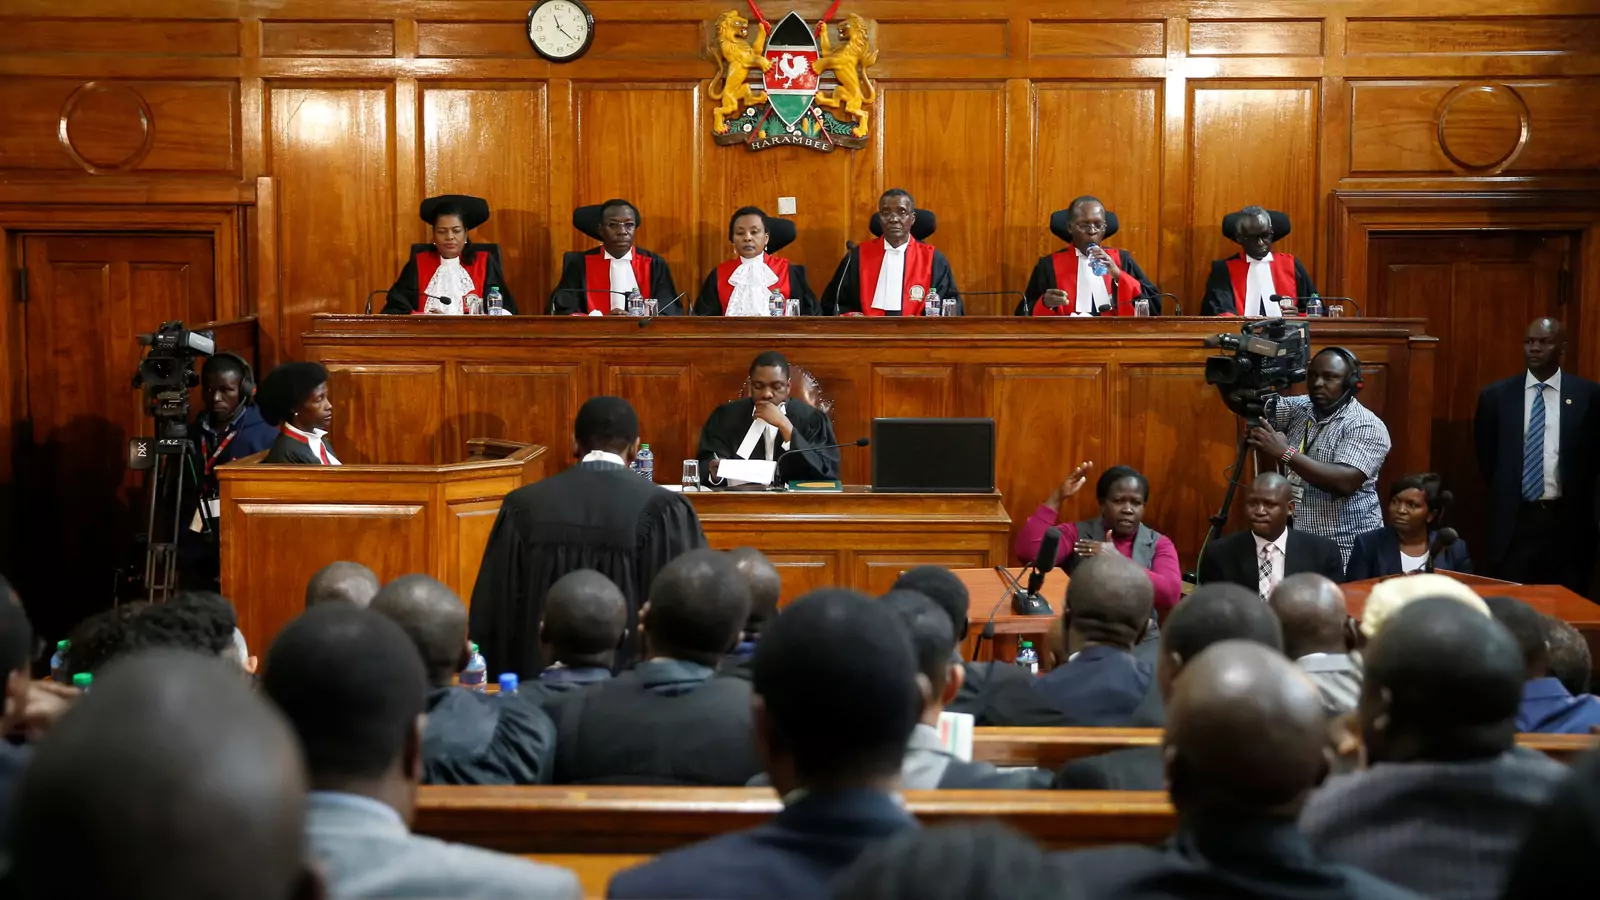 Victory for the Rule of Law in Kenya | Council on Foreign Relations